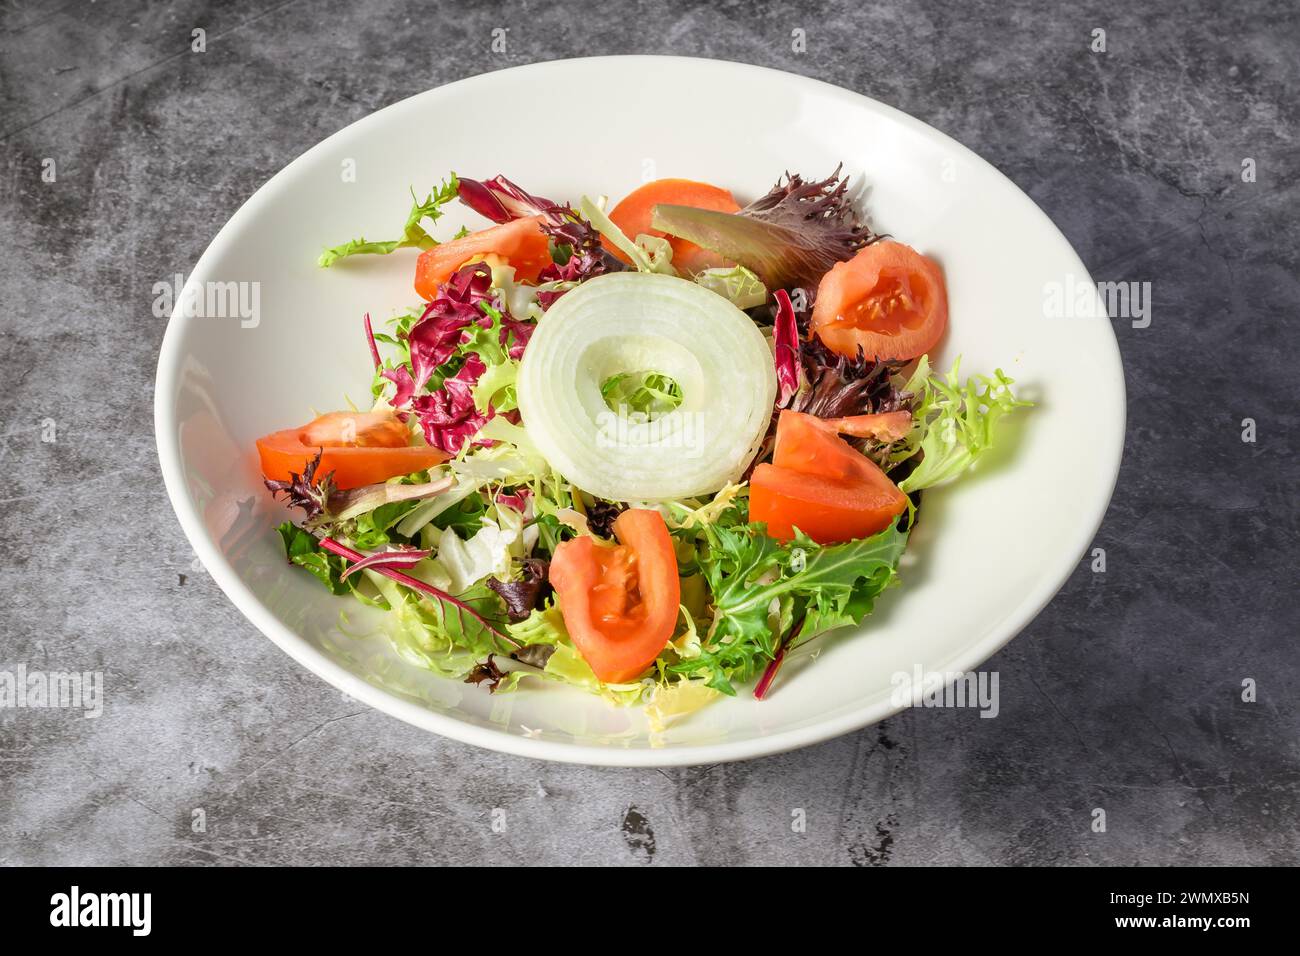 Green vegan salad from green leaves mix and vegetables. Top view on gray stone table Stock Photo